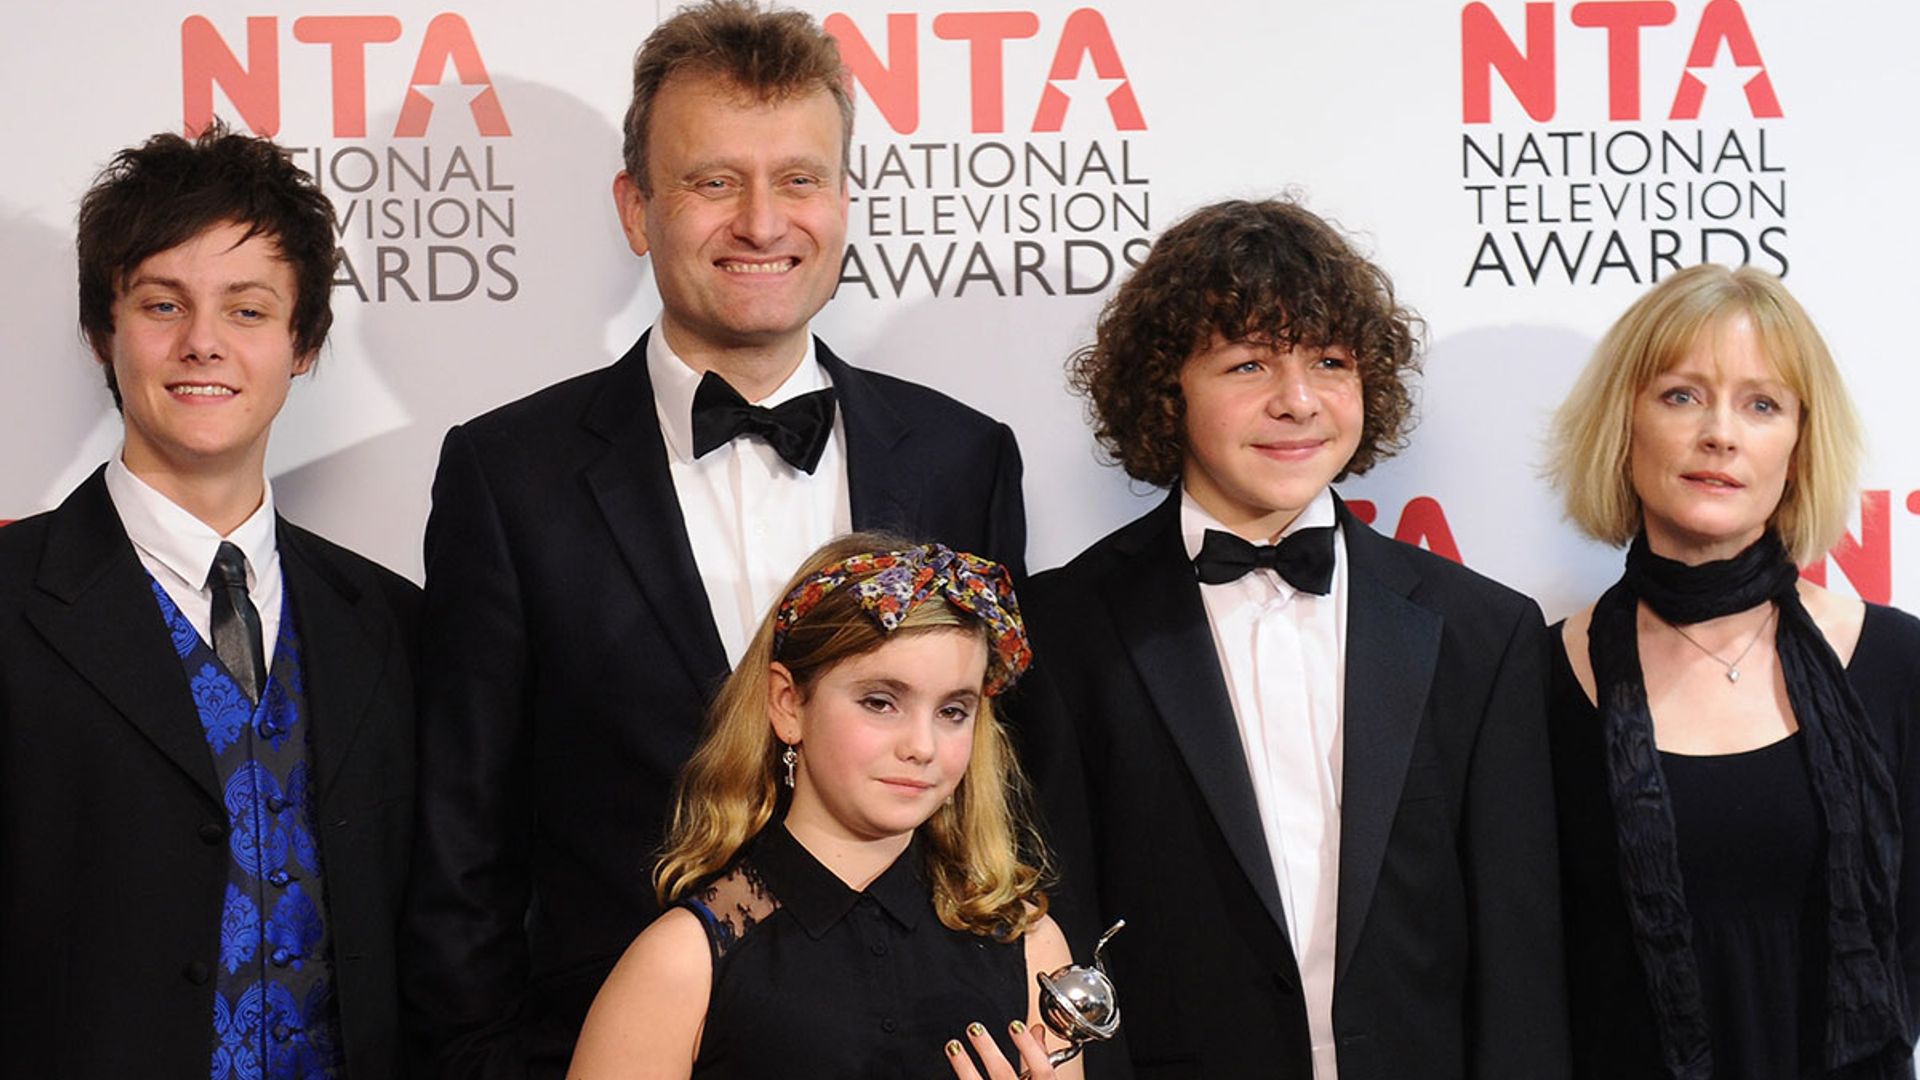 outnumbered stars